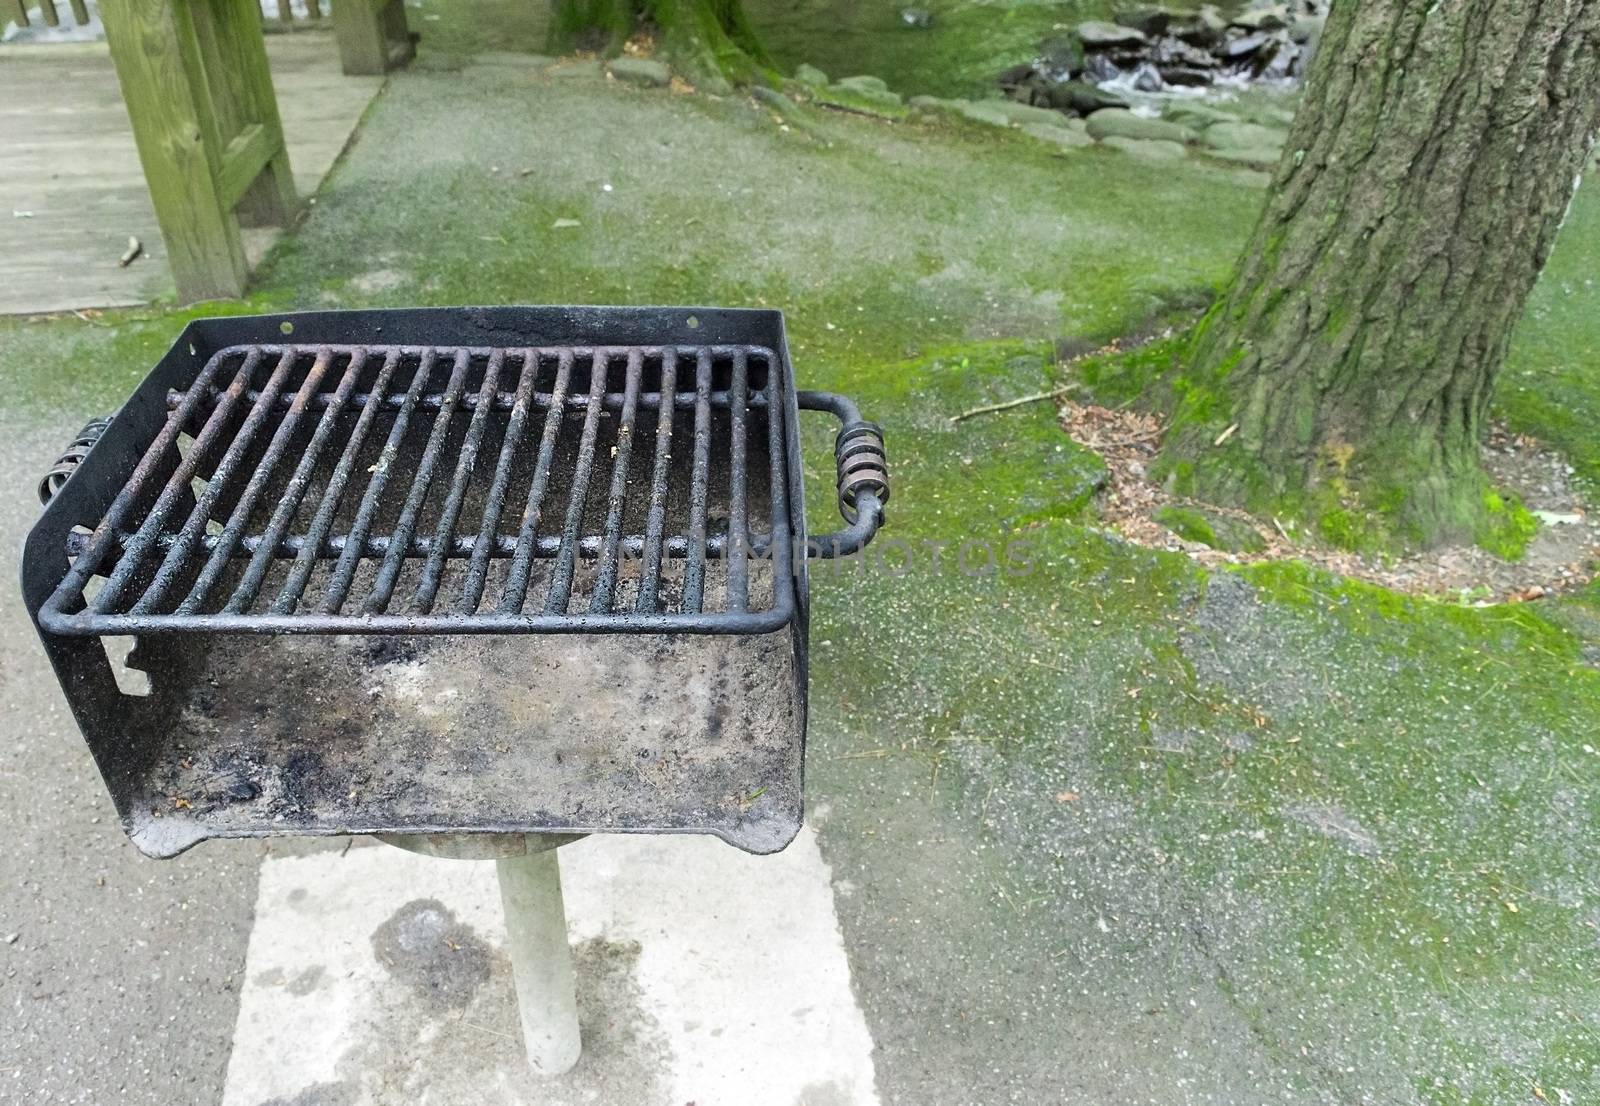 Horizontal shot of a used pubic area barbecue grill in a picnic area with copy space.